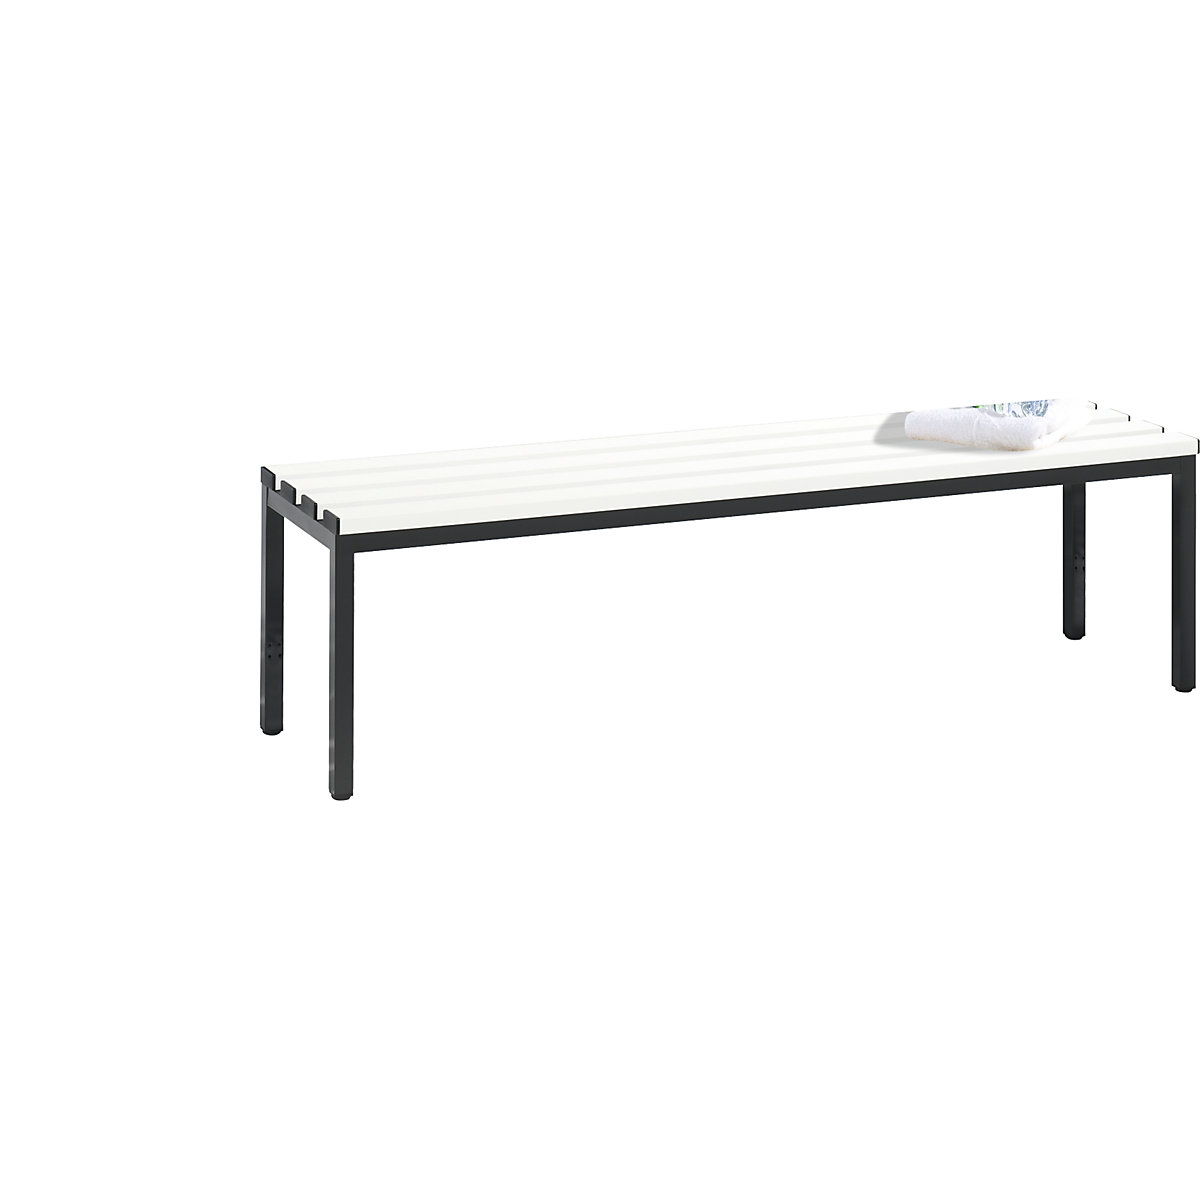 BASIC cloakroom bench – C+P, plastic, length 1500 mm, pure white-6